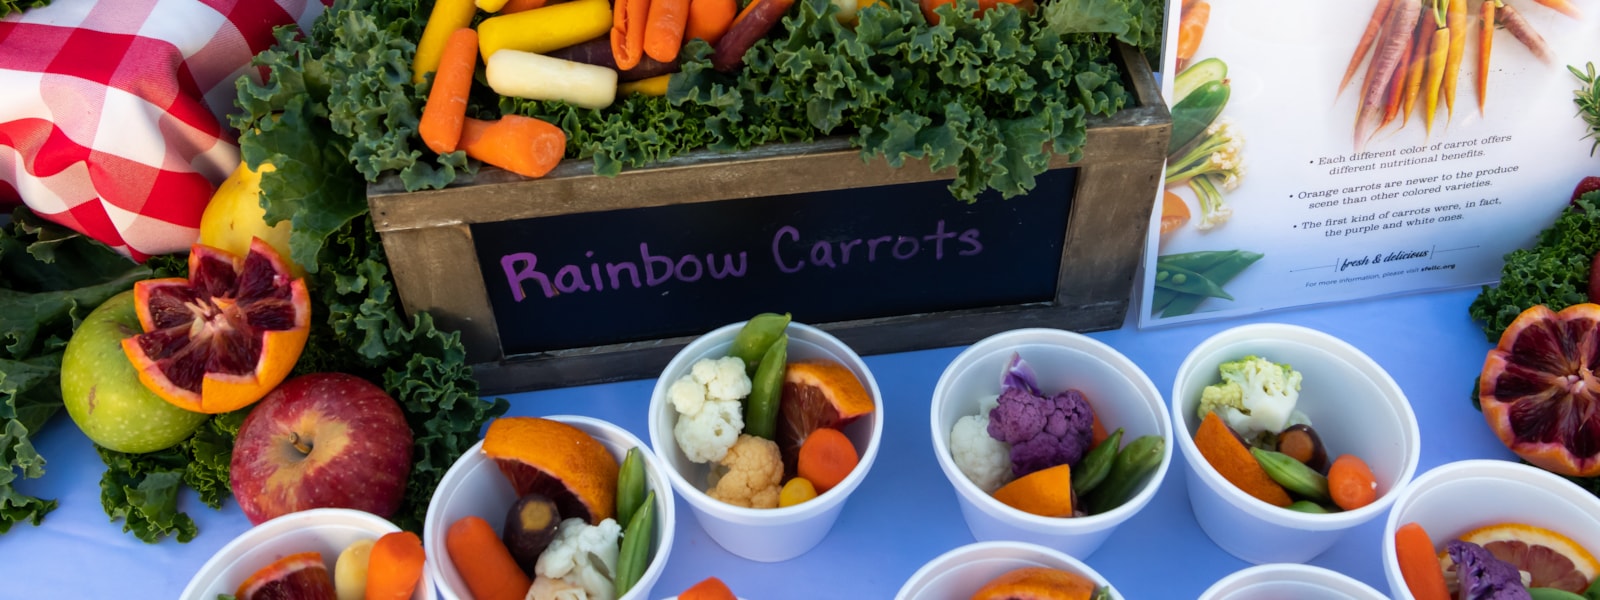 fruits and veggies on a table with a box of rainbow carrots